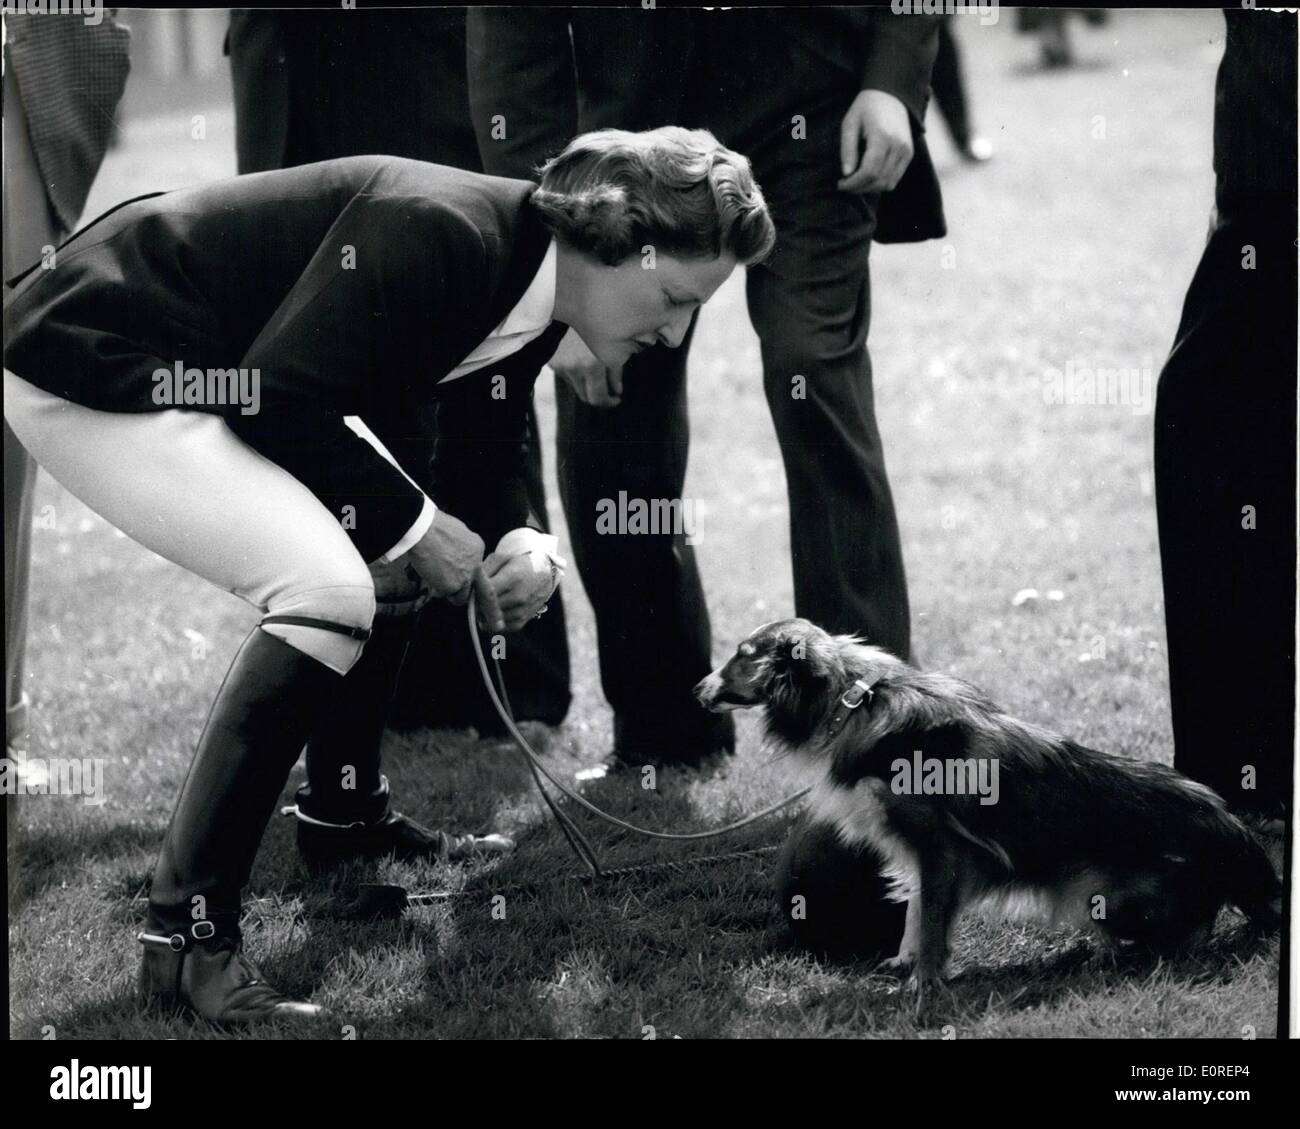 Apr. 04, 1959 - The Duchess Of Norfolk Retrieves Her Riding Cap From Her Pet Dog: The Duchess of Norfolk took part in the Foxhunter Composition and Fenwolf Stakes at the Ascot Jumping Show yesterday. Photo shows The Duchess dropped her riding cap and her pet dog grabbed it, delicately chewed a corner of it, delicately chewed a corner of it, but finally allowed the duchess to pick it up. Stock Photo